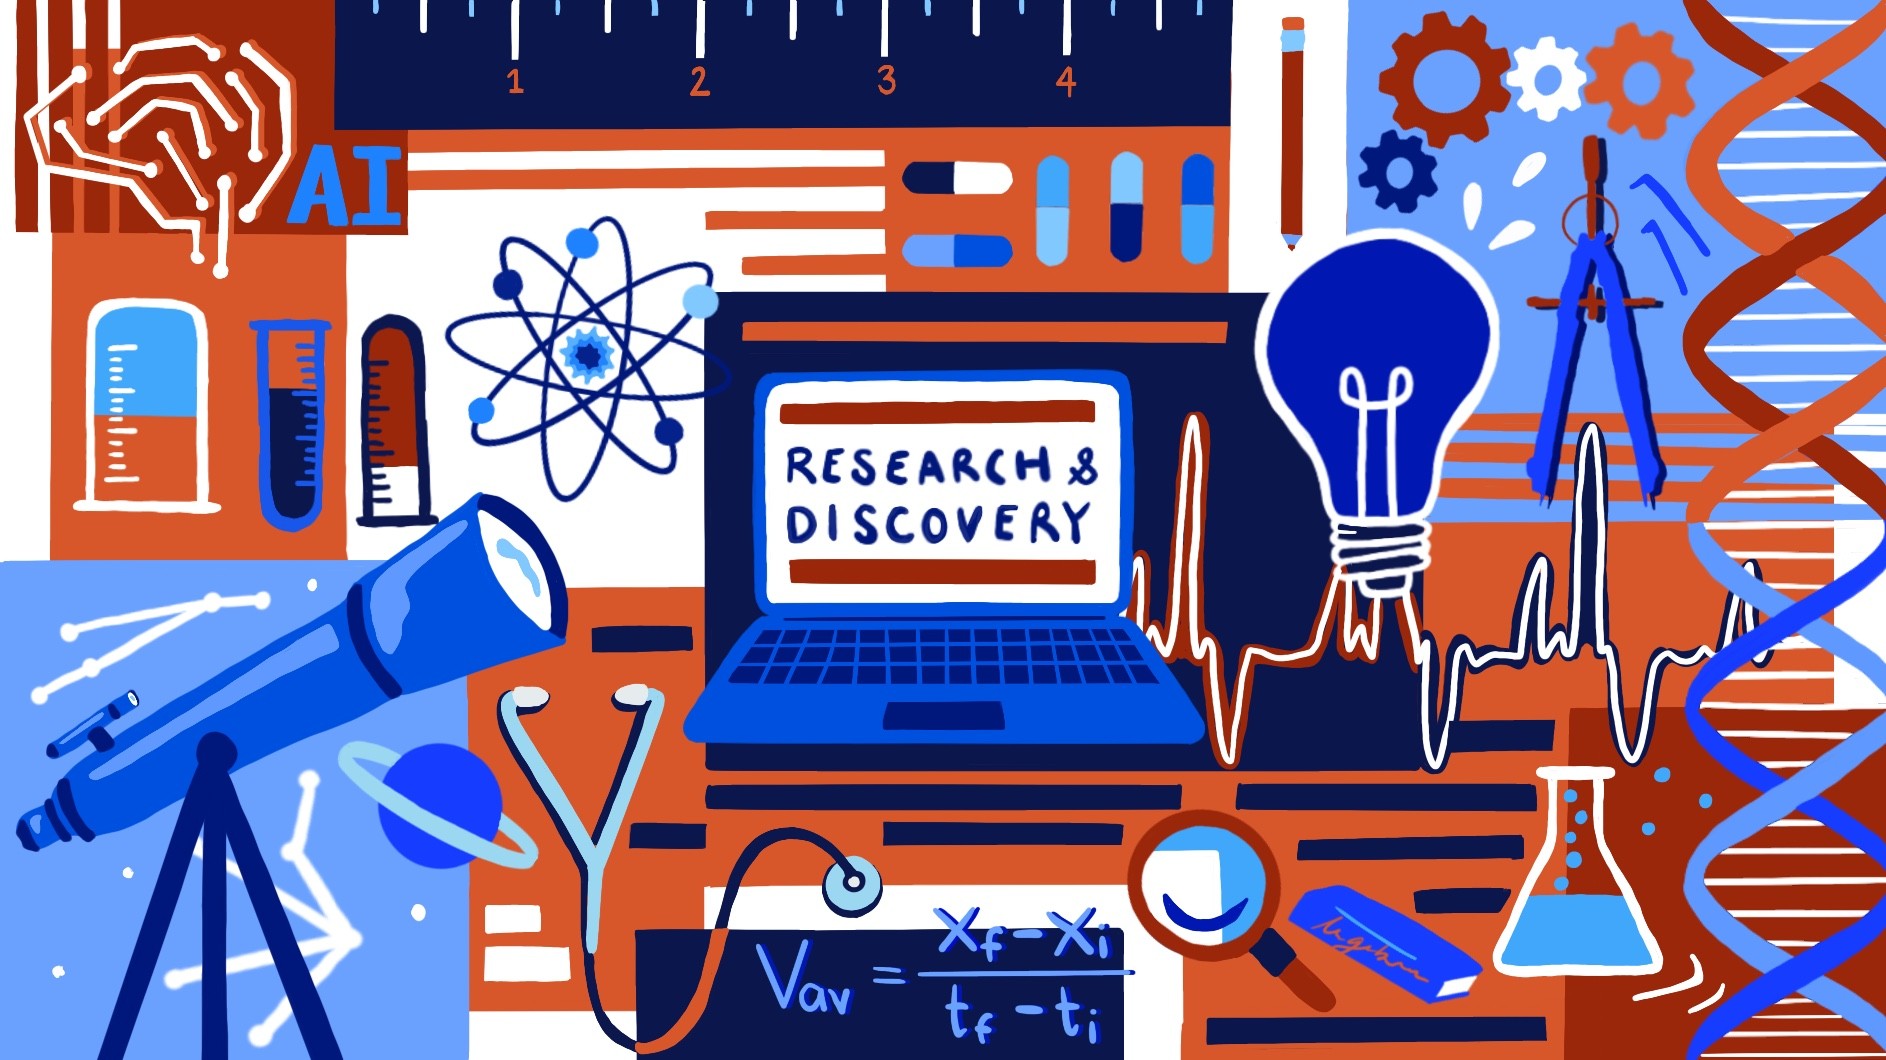 Research and Discovery themed graphic illustration.